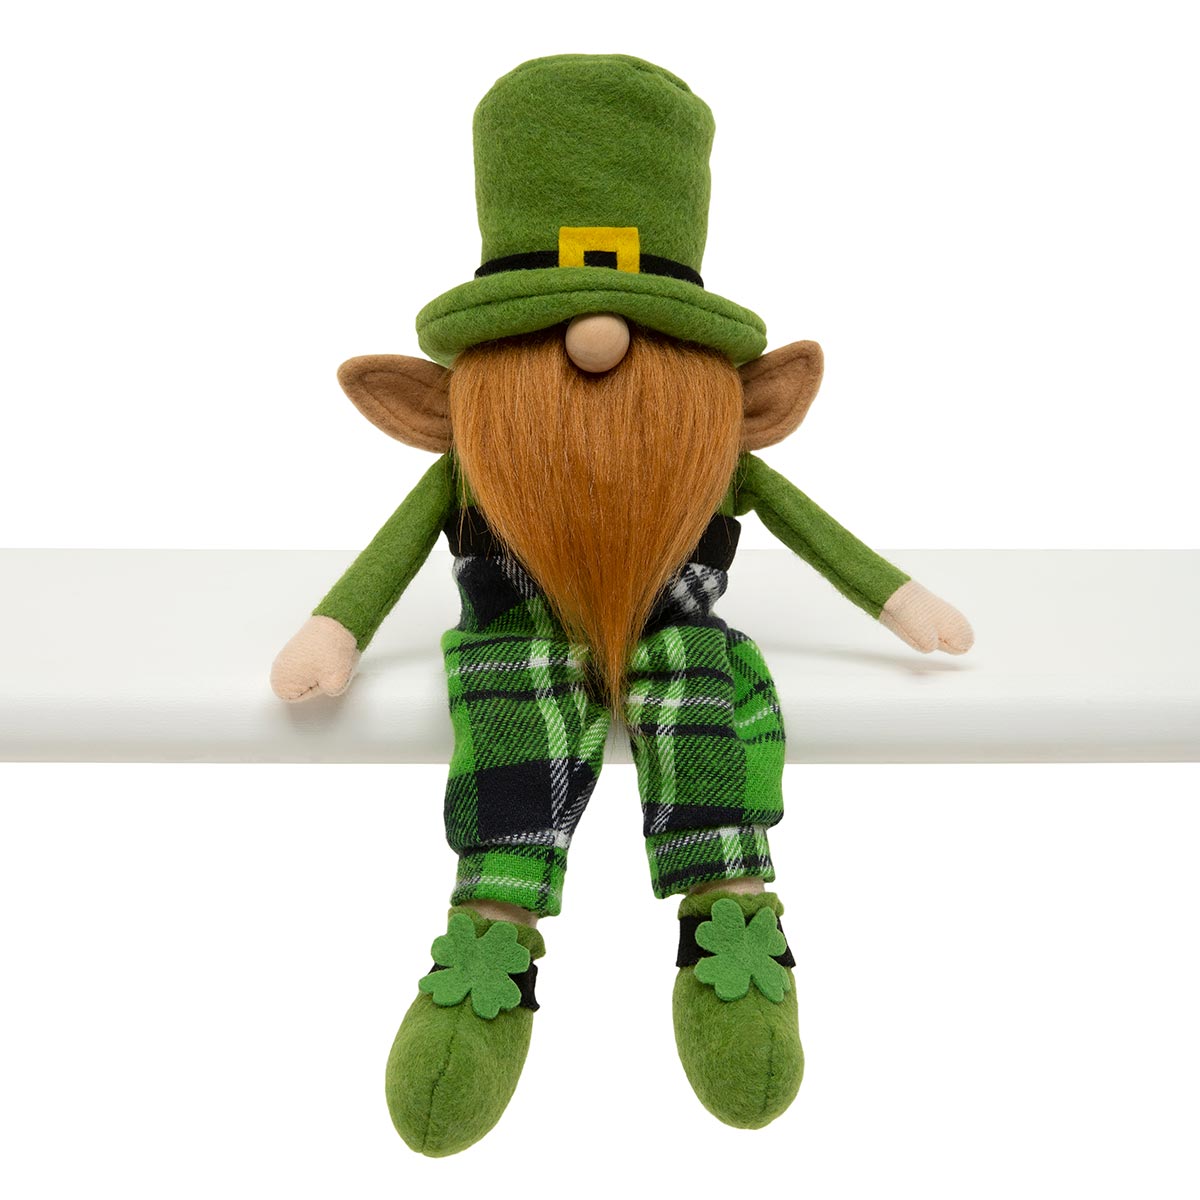 LEPRECHAUN GNOME GREEN WITH BUCKLE HAT, WOOD NOSE,